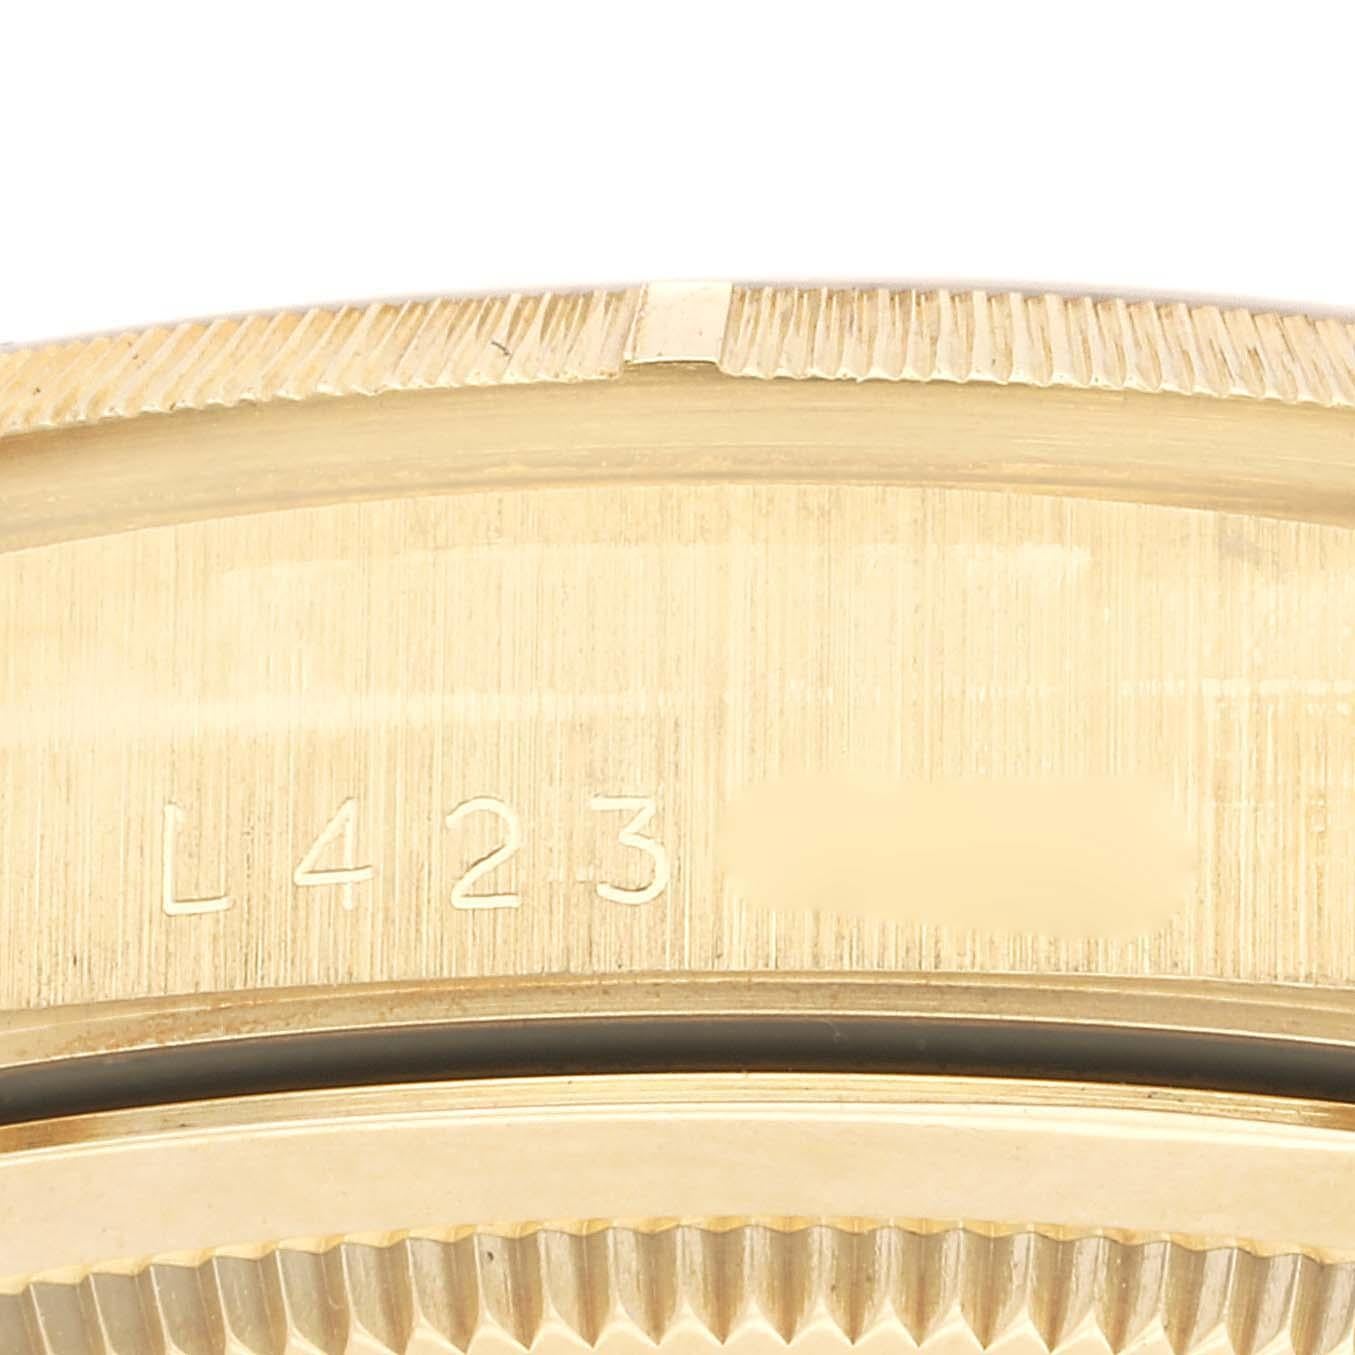 Rolex Day-Date President Yellow Gold Bark Finish Mens Watch 18248. Officially certified chronometer autmomatic self-winding movement. 18k yellow gold oyster case 36 mm in diameter. Rolex logo on a crown. 18k yellow gold bark finish bezel. Scratch